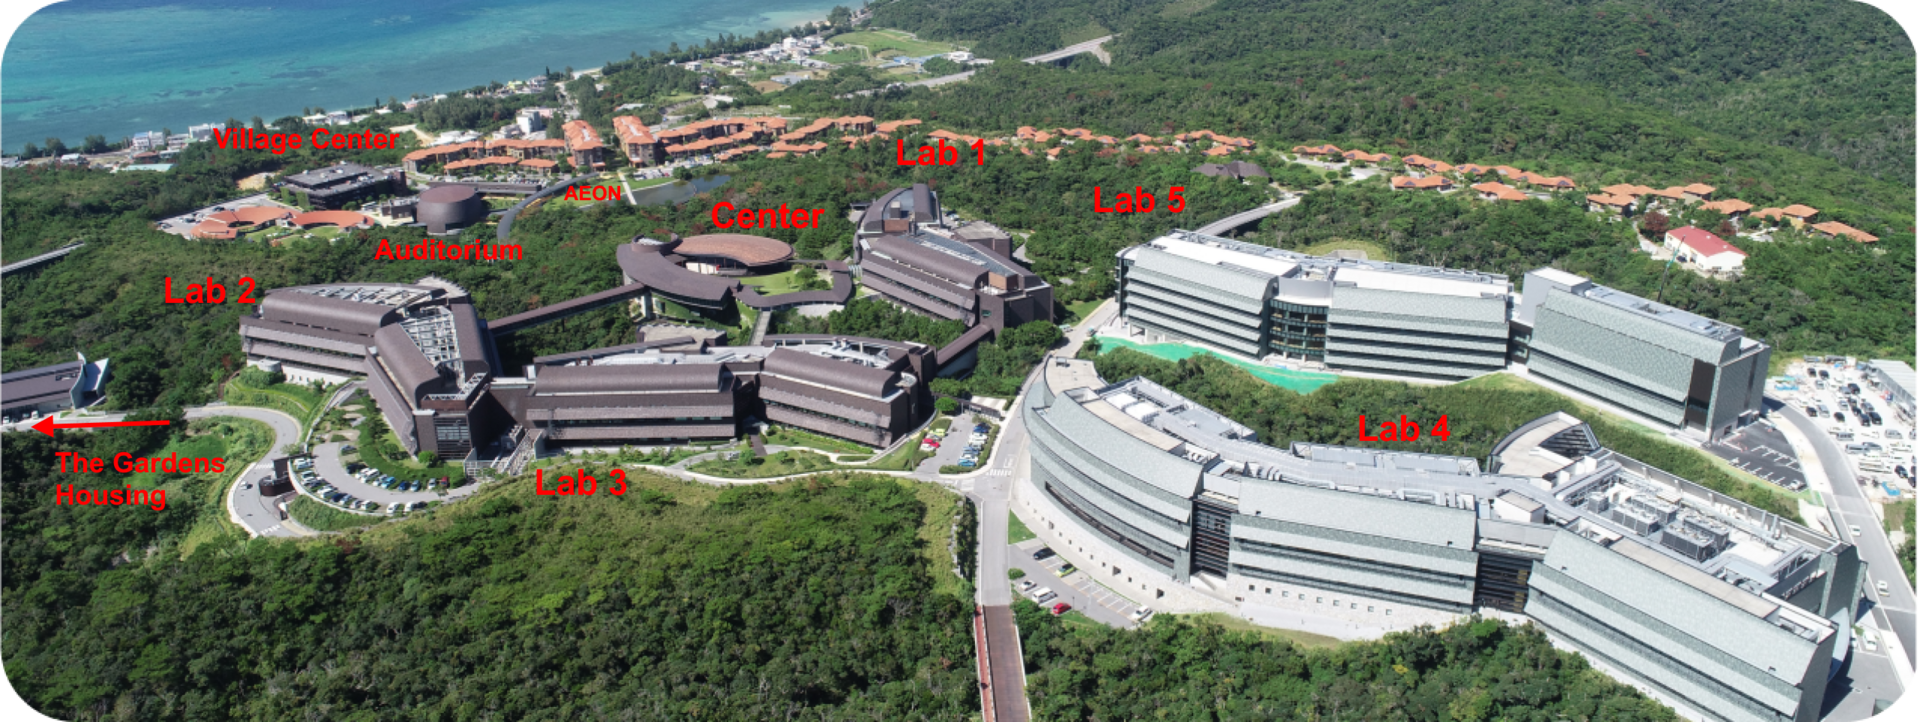 Aerial View of the Campus, with description